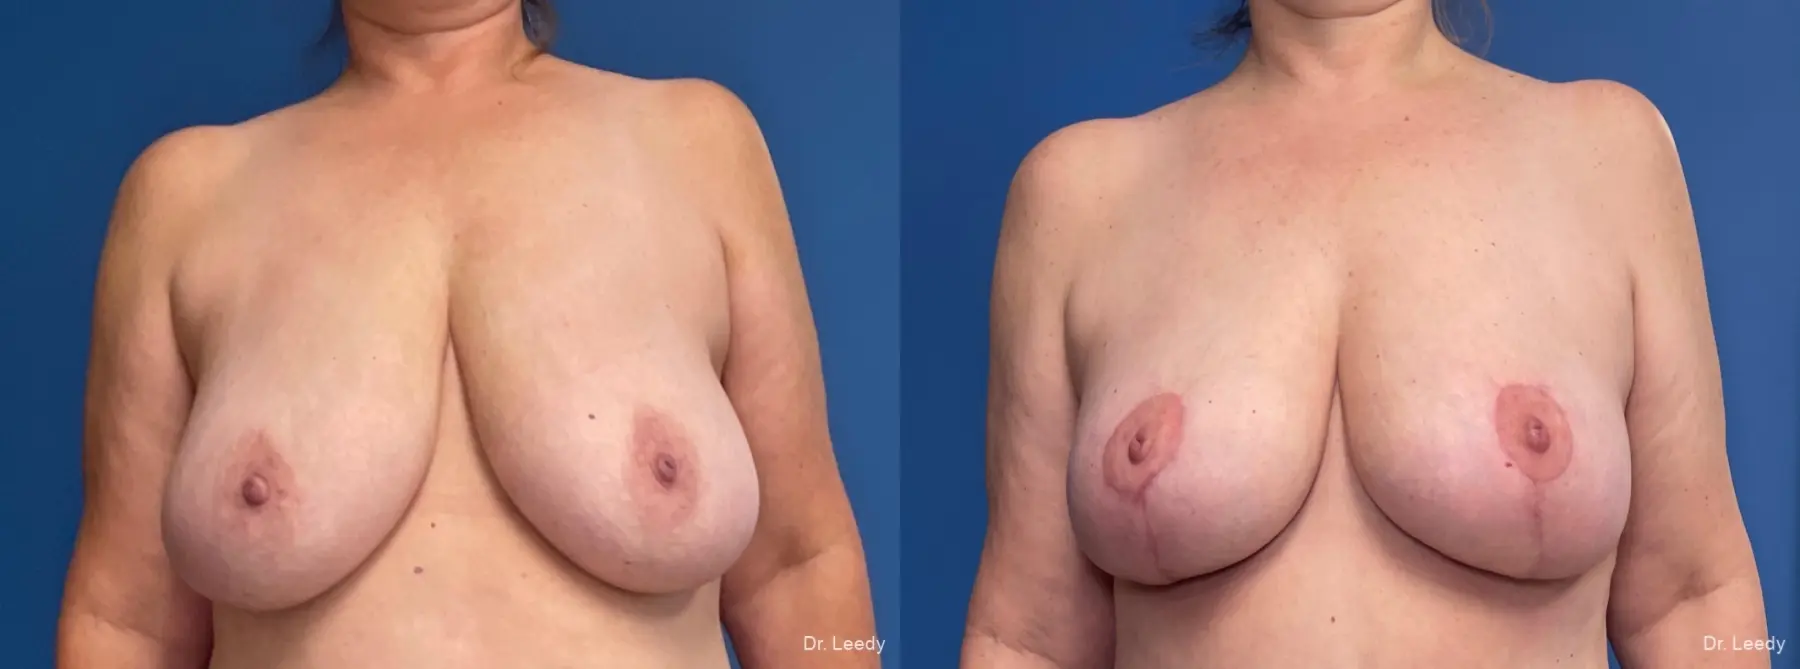 Mastopexy: Patient 4 - Before and After 1